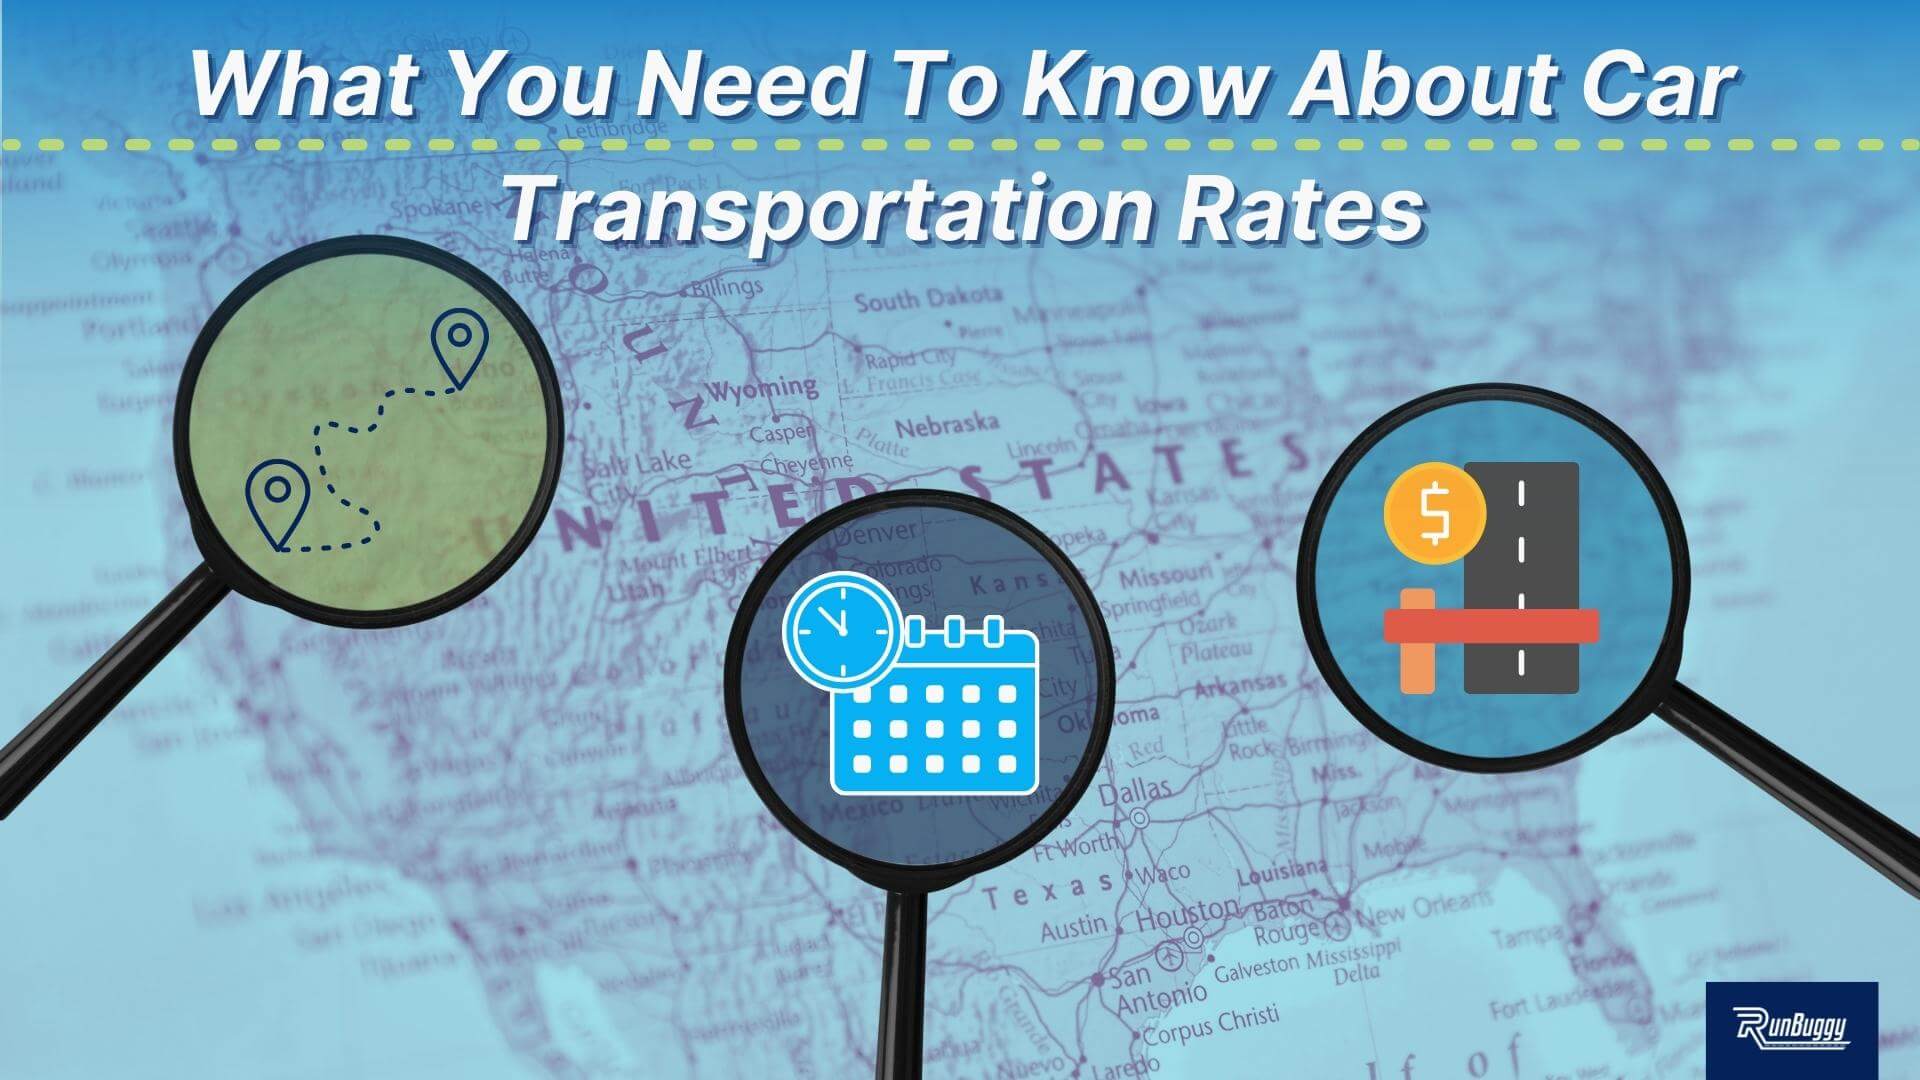 What You Need To Know About Car Transportation Rates